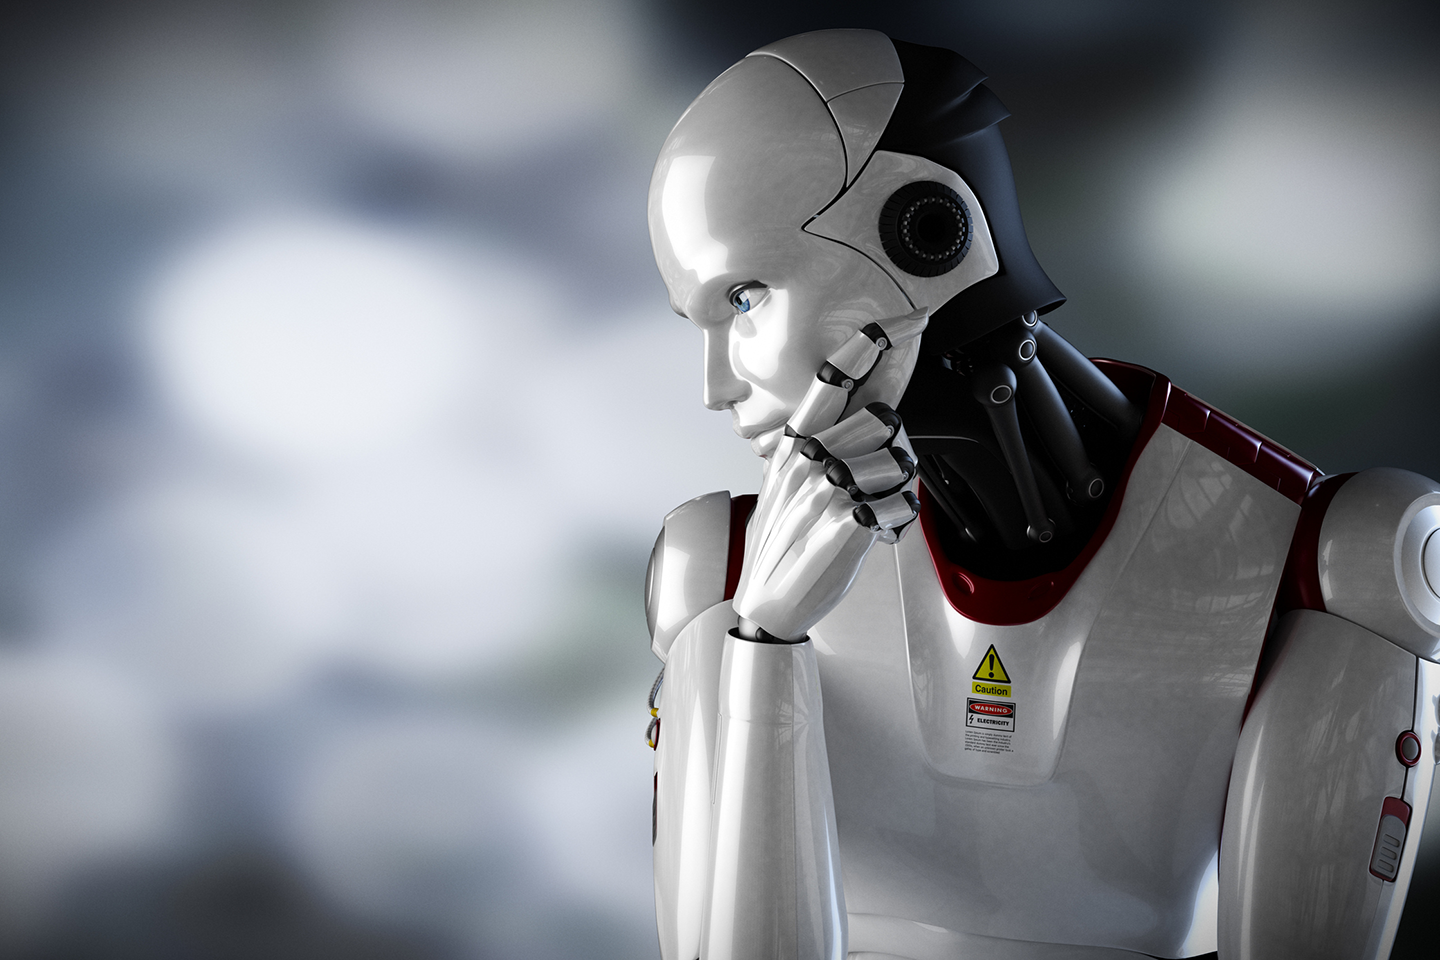 Can robots be prosecuted for a crime?